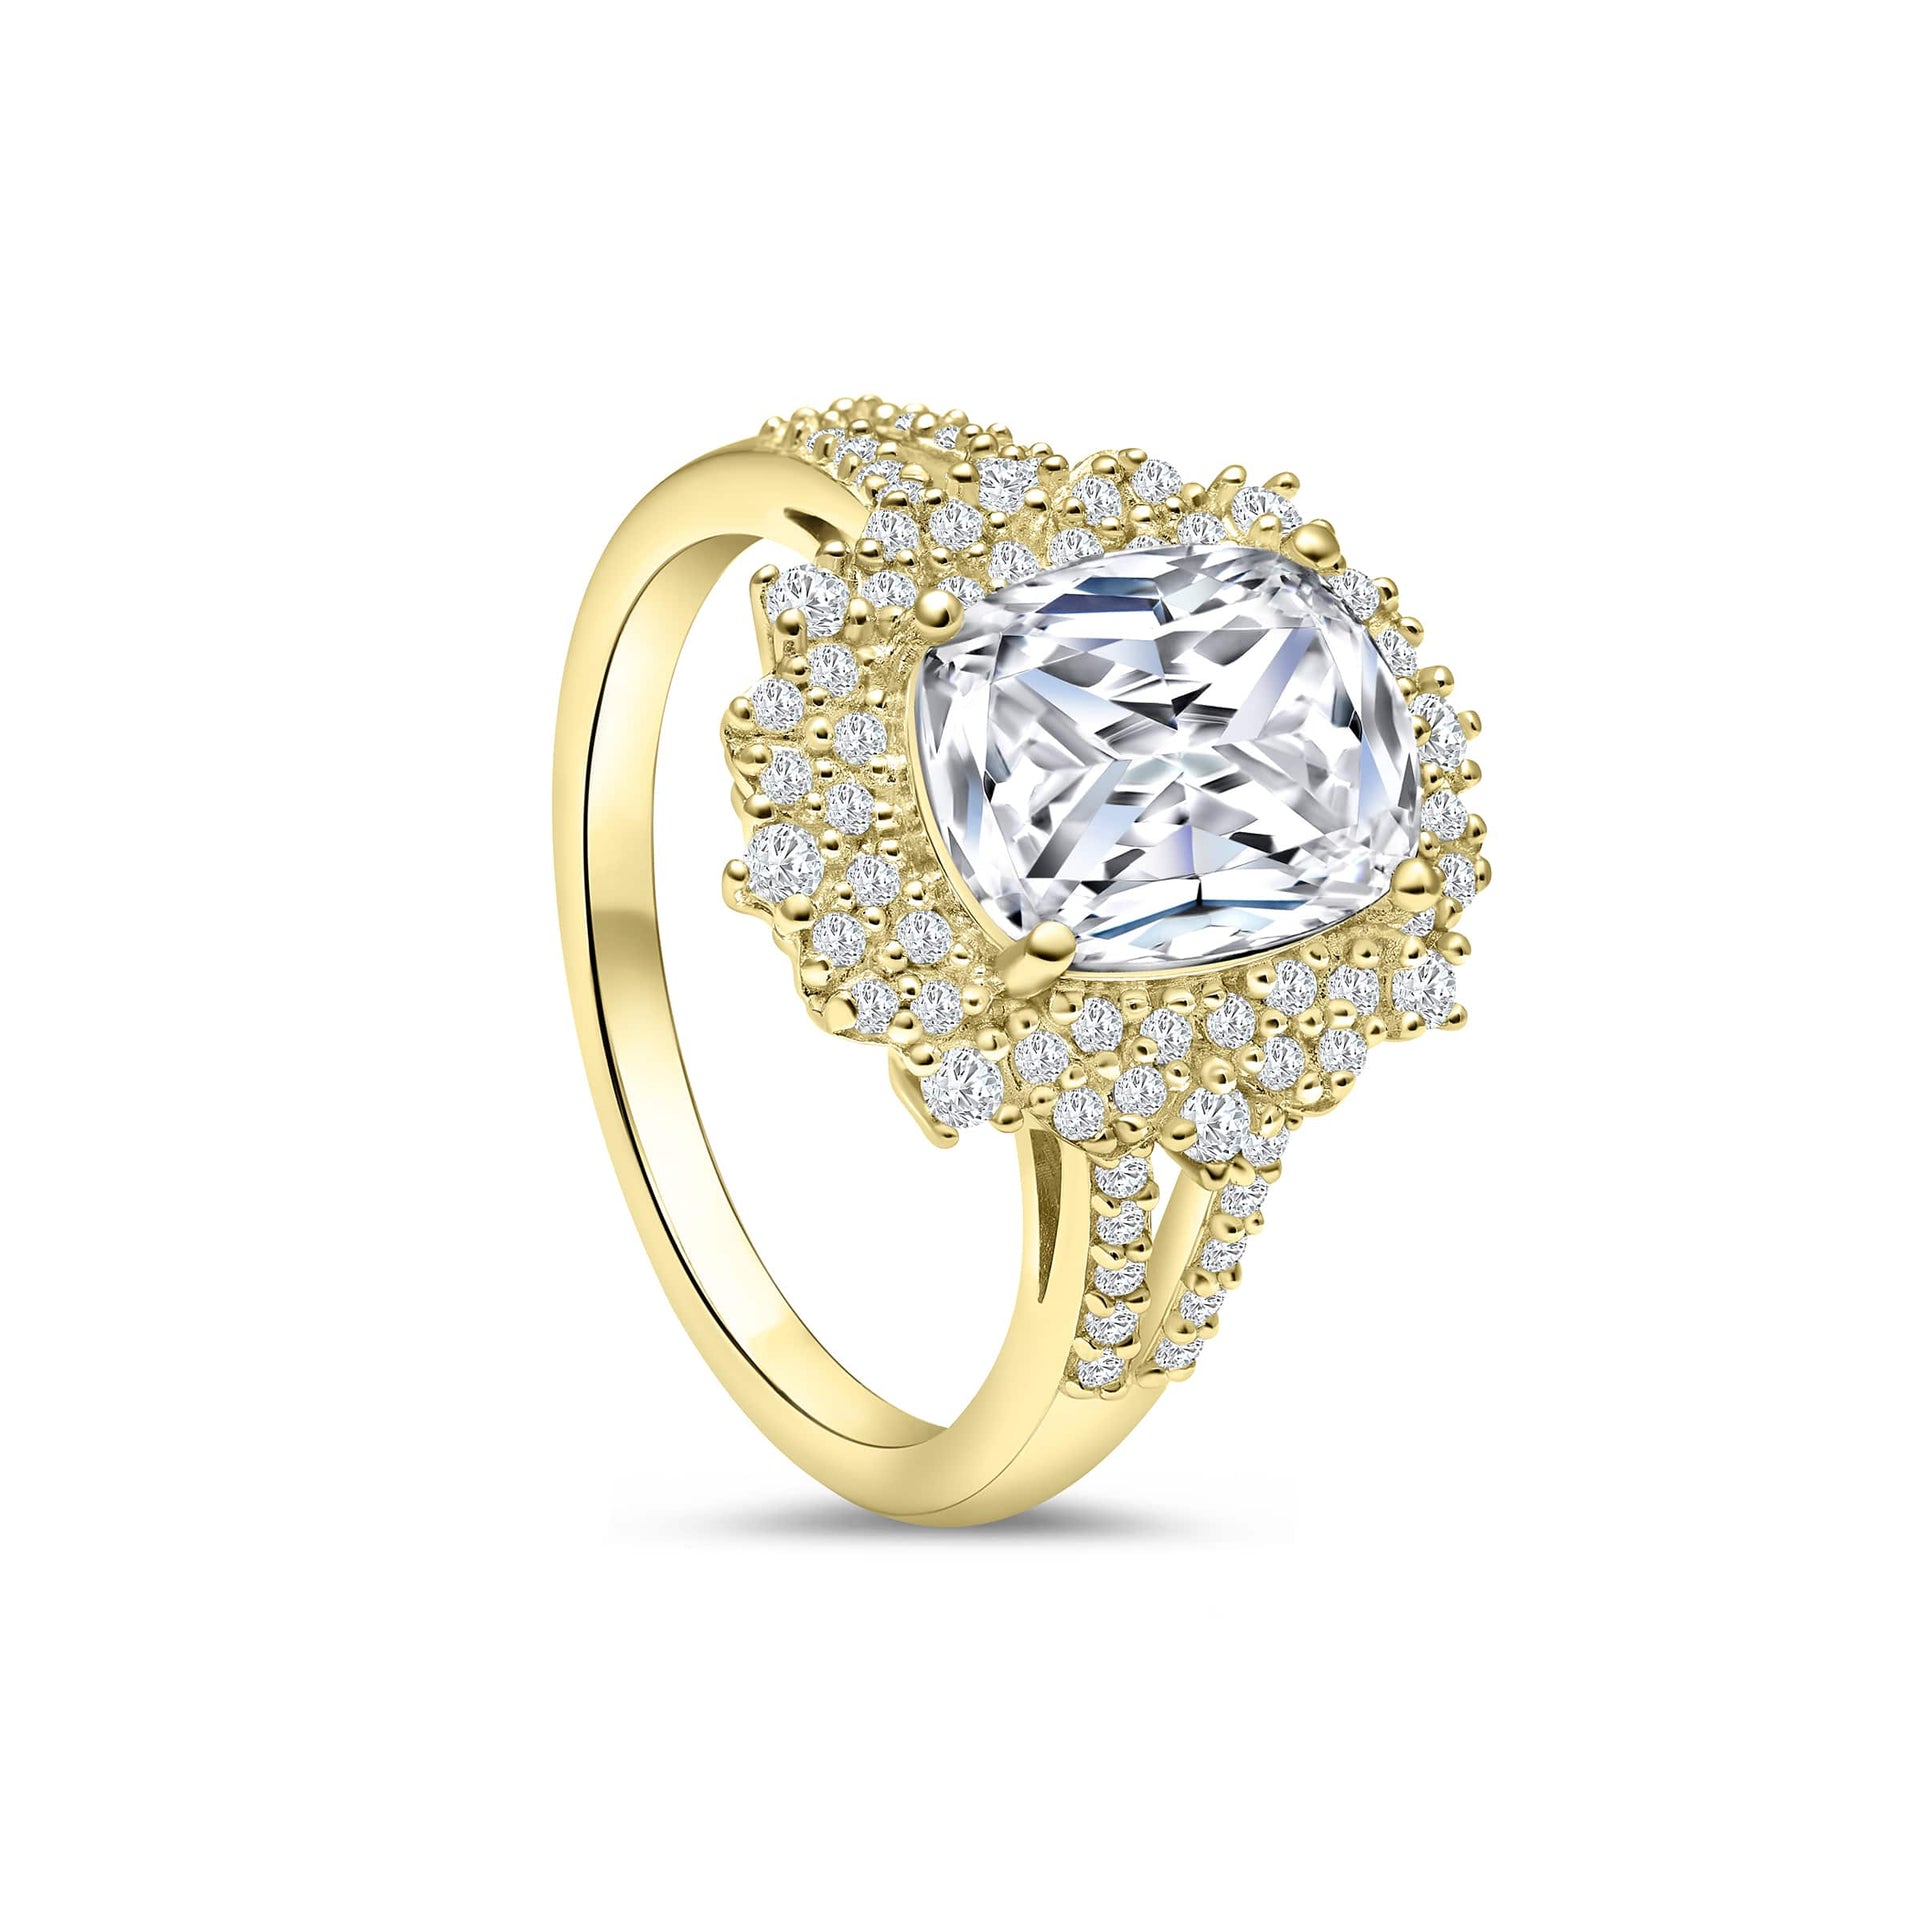 tilted engagement ring showing beautiful 2.5 ct cushion cut engagement ring in gold